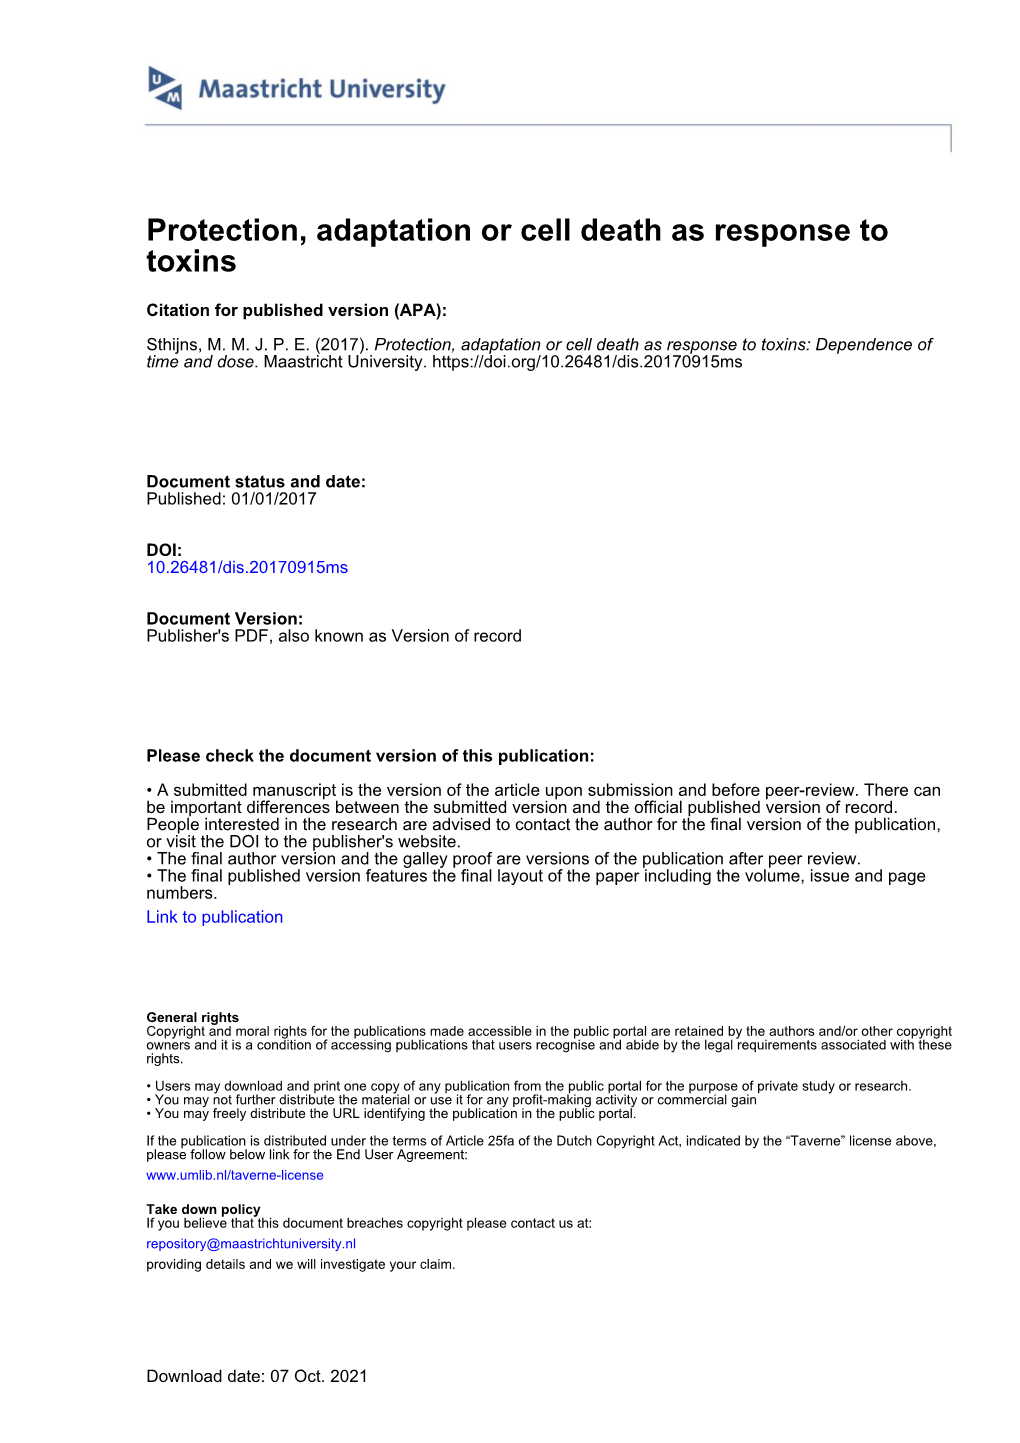 Protection, Adaptation Or Cell Death As Response to Toxins